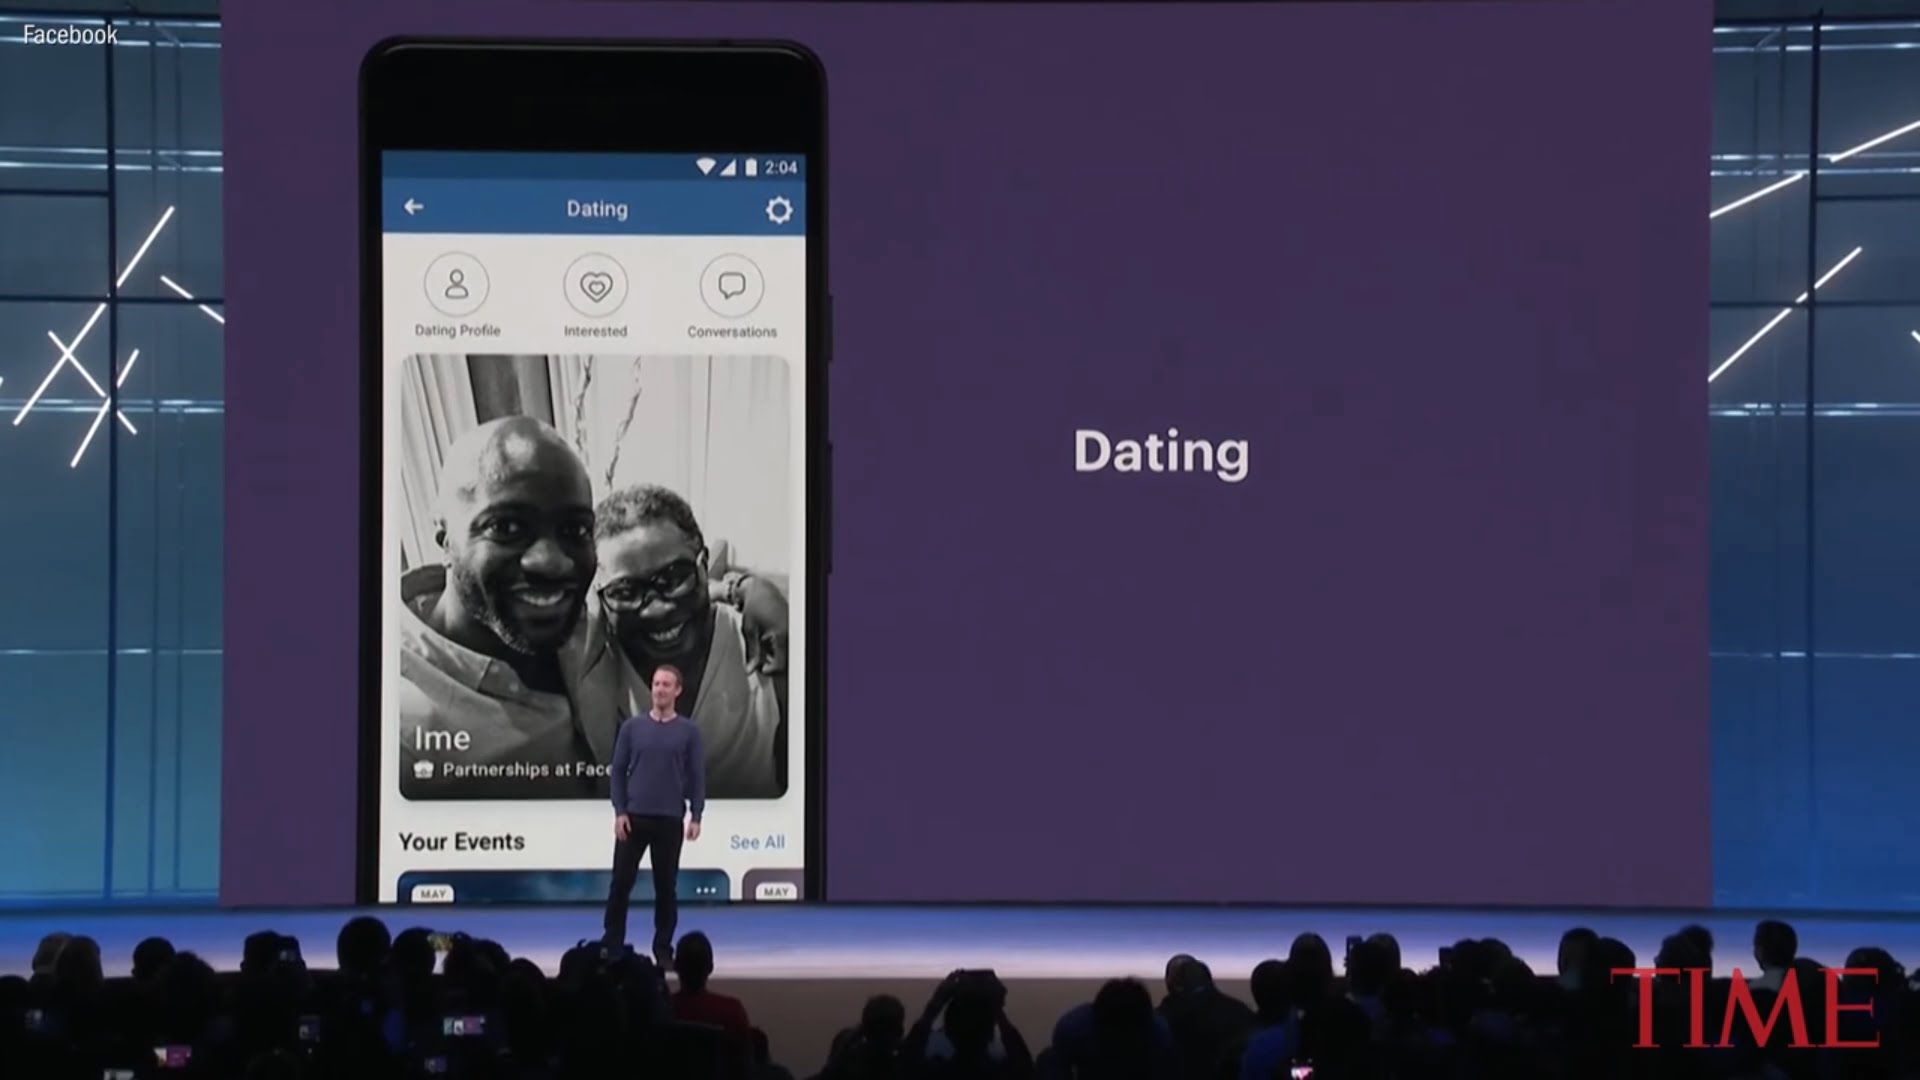 Facebook Dating Is Finally Here!